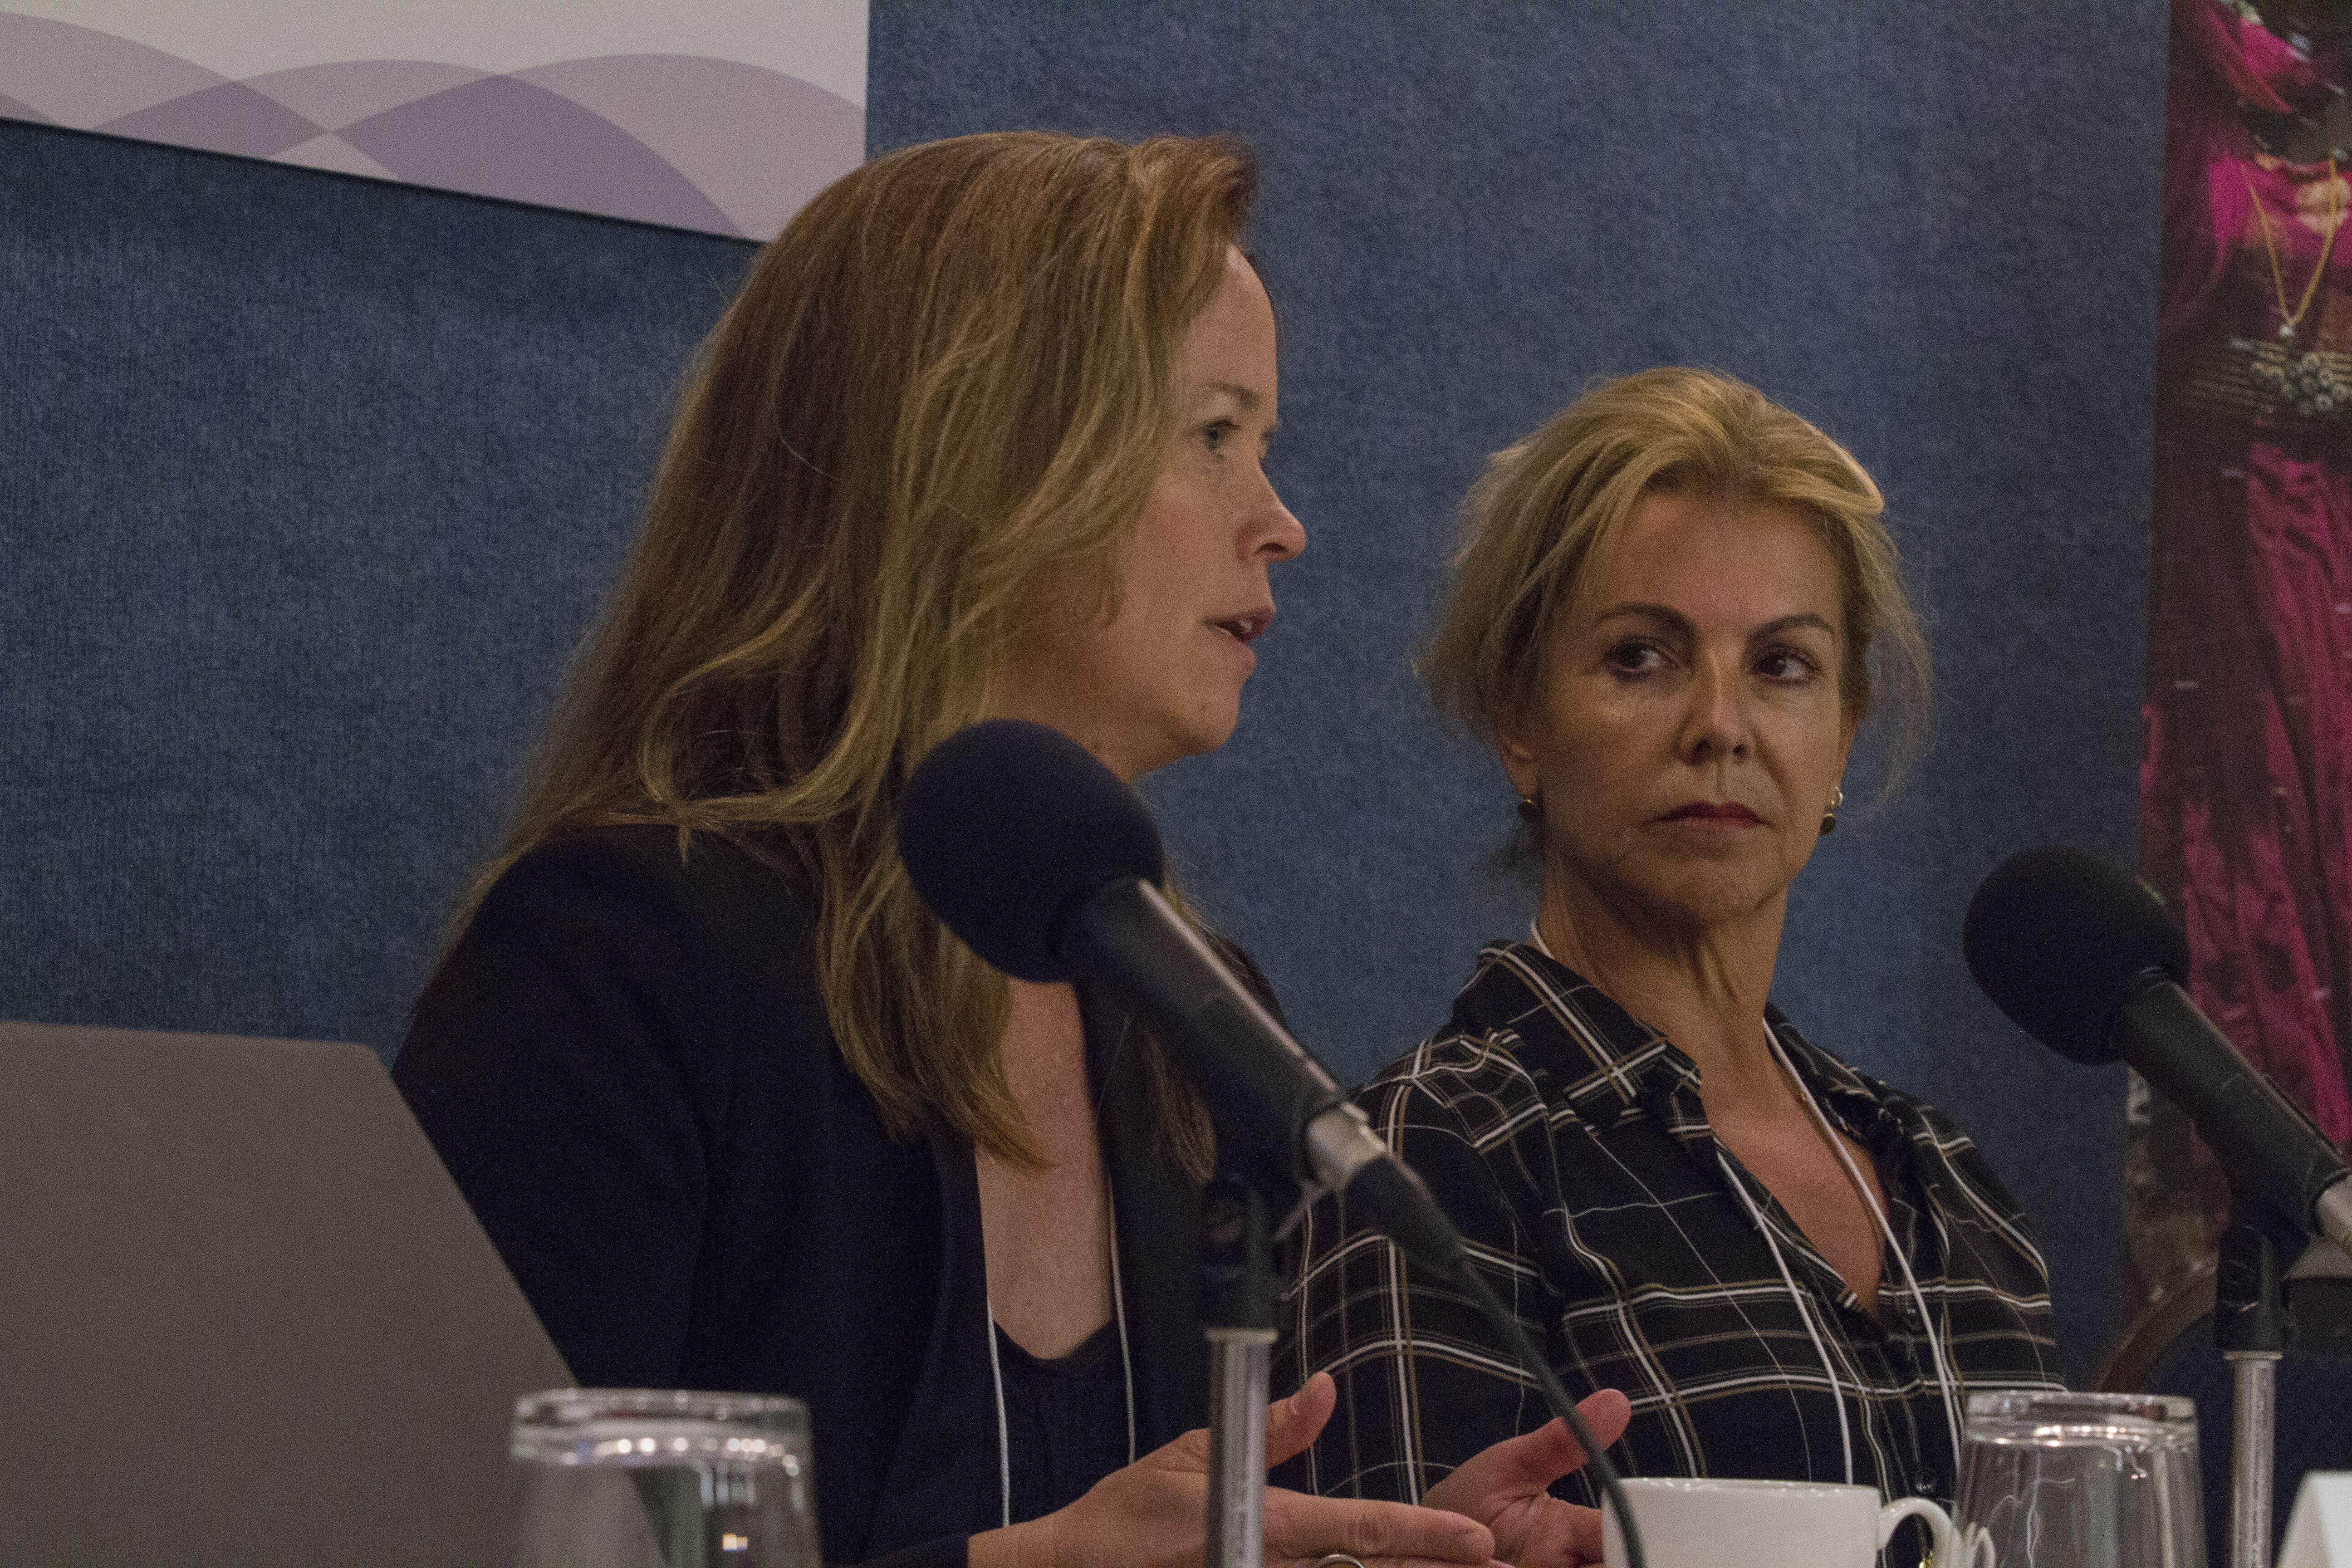 Property Rights panelists Amy Toensing and Paola Totaro discuss widows' land rights at Pulitzer Center Gender Lens. Image by Jin Ding. United States, 2017. 